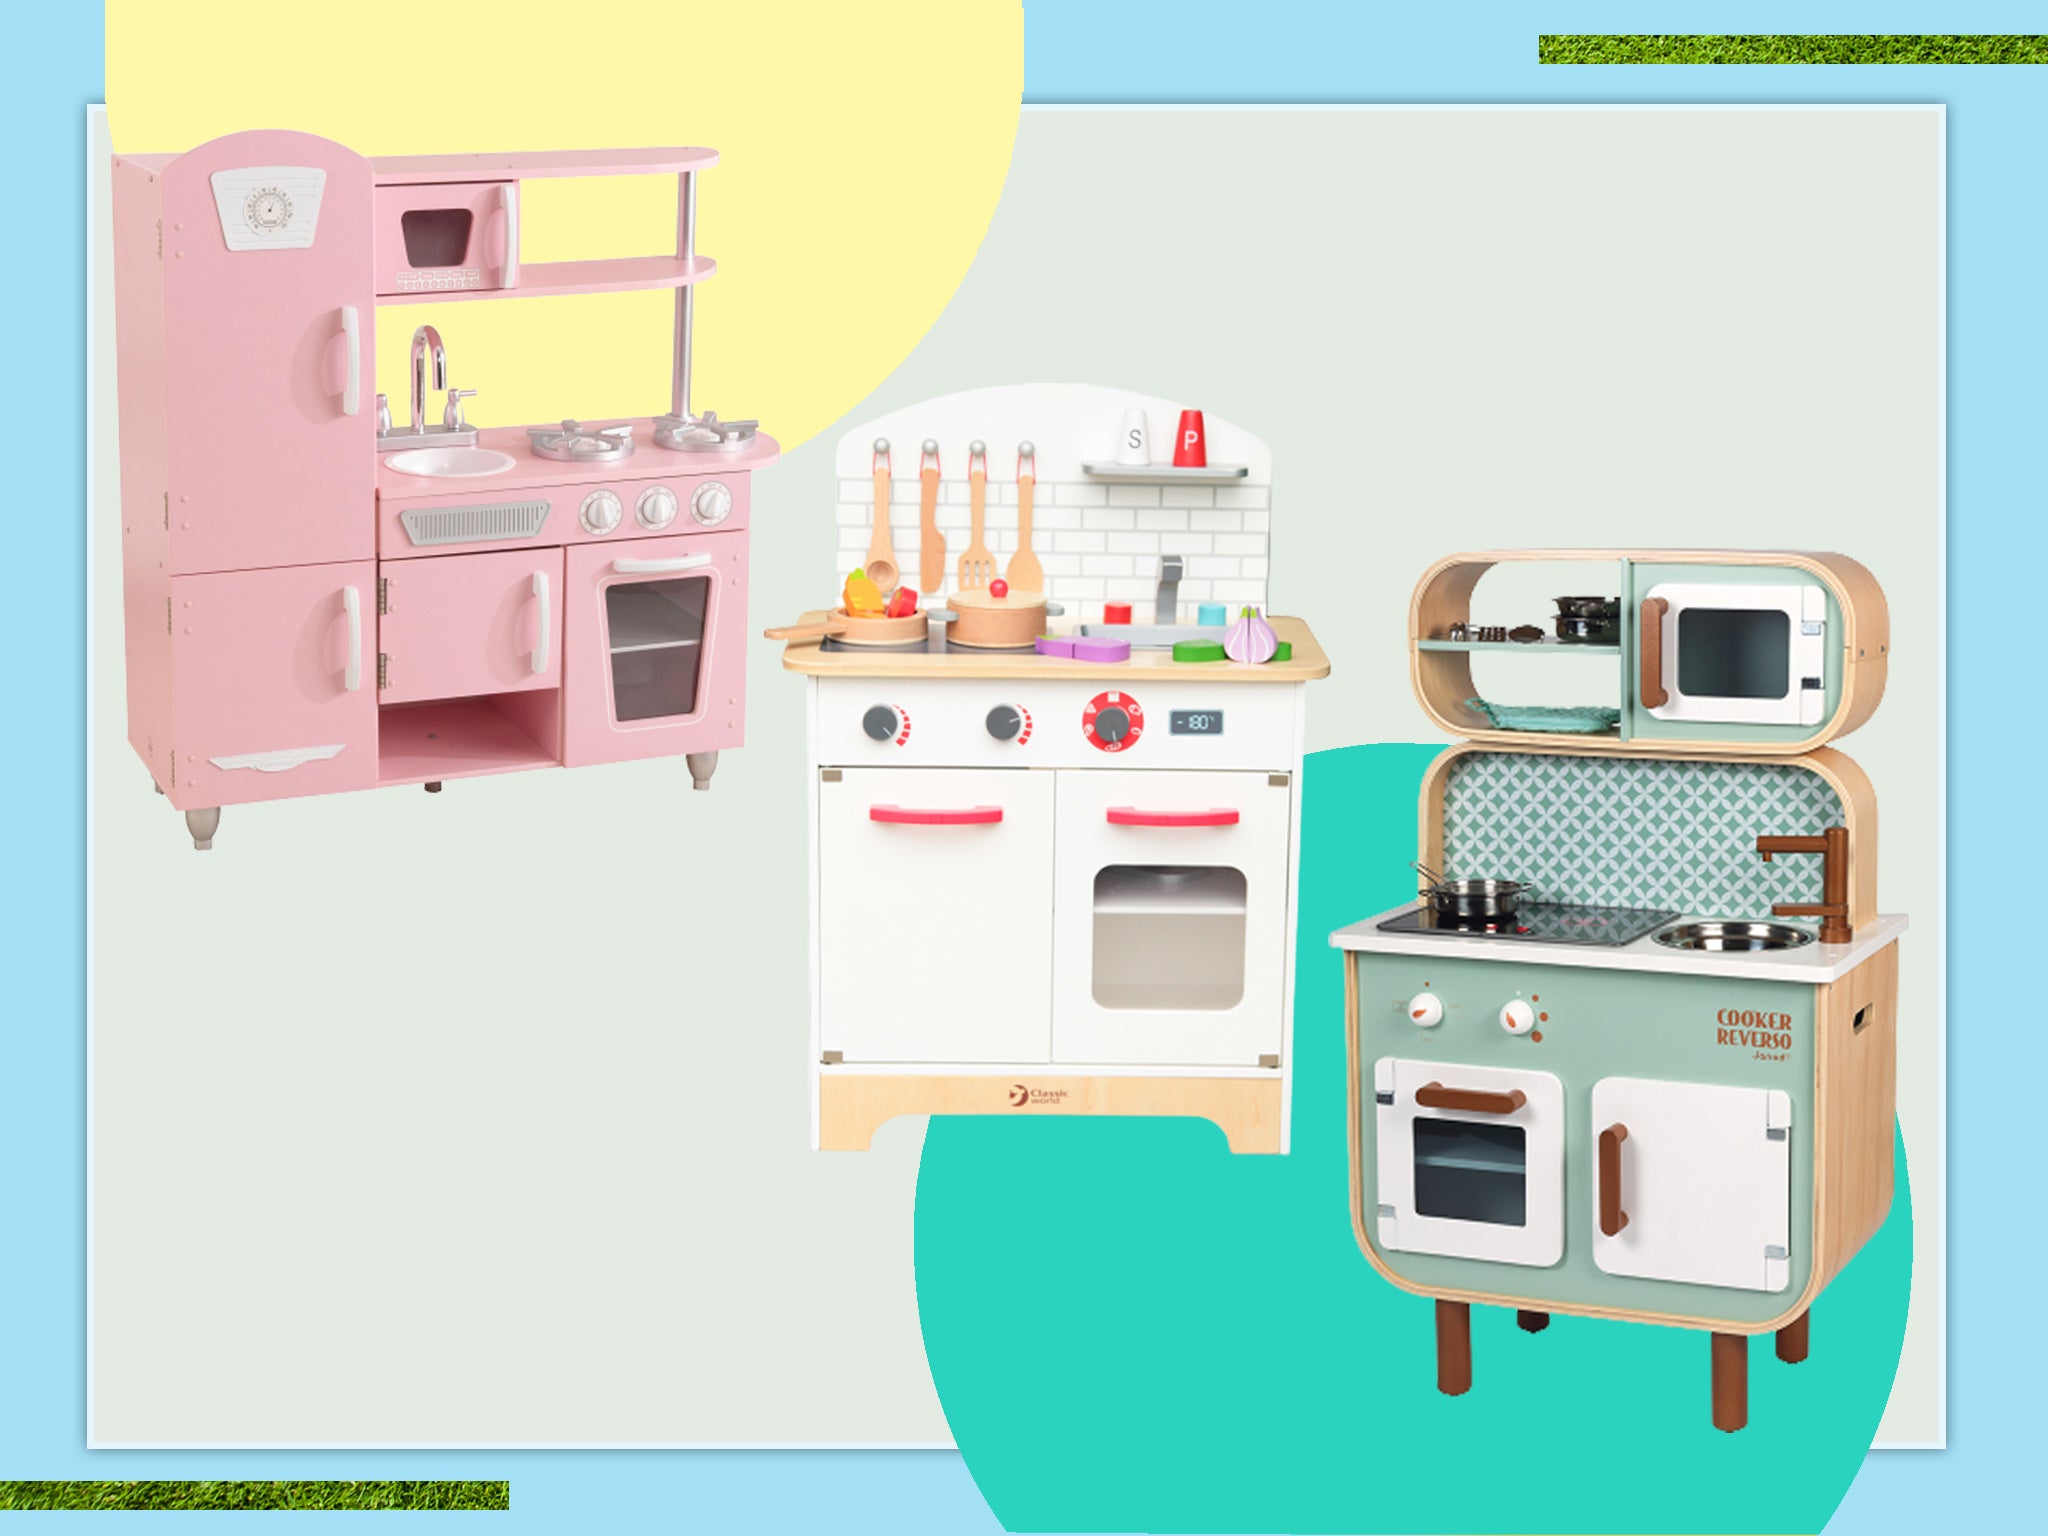 Kids Play Kitchen Children's Kitchen Cooking Toy Cooker Play Set Sounds UK Pink 